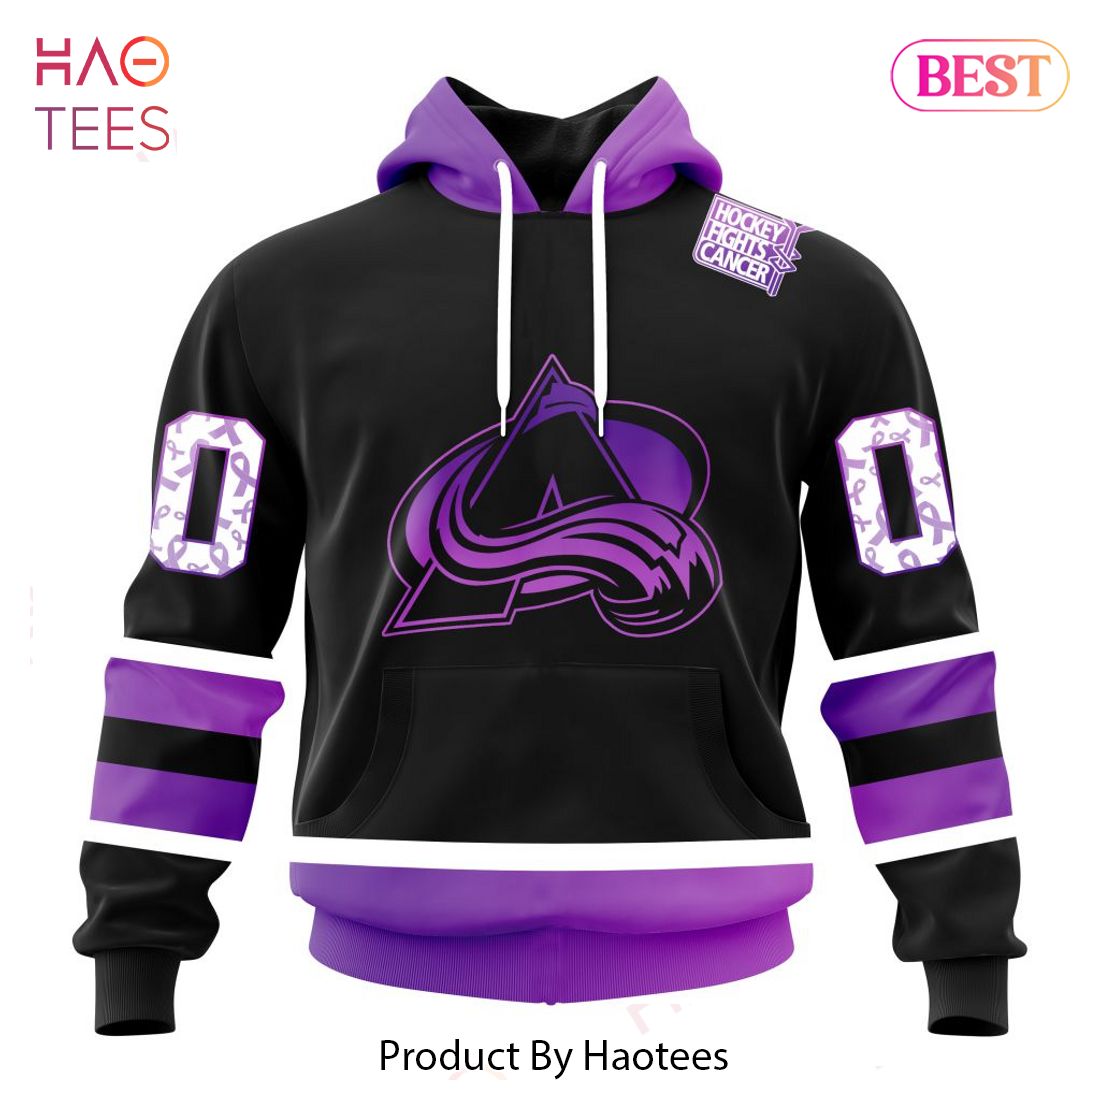 BEST NHL Colorado Avalanche Special Black Hockey Fights Cancer Kits 3D Hoodie